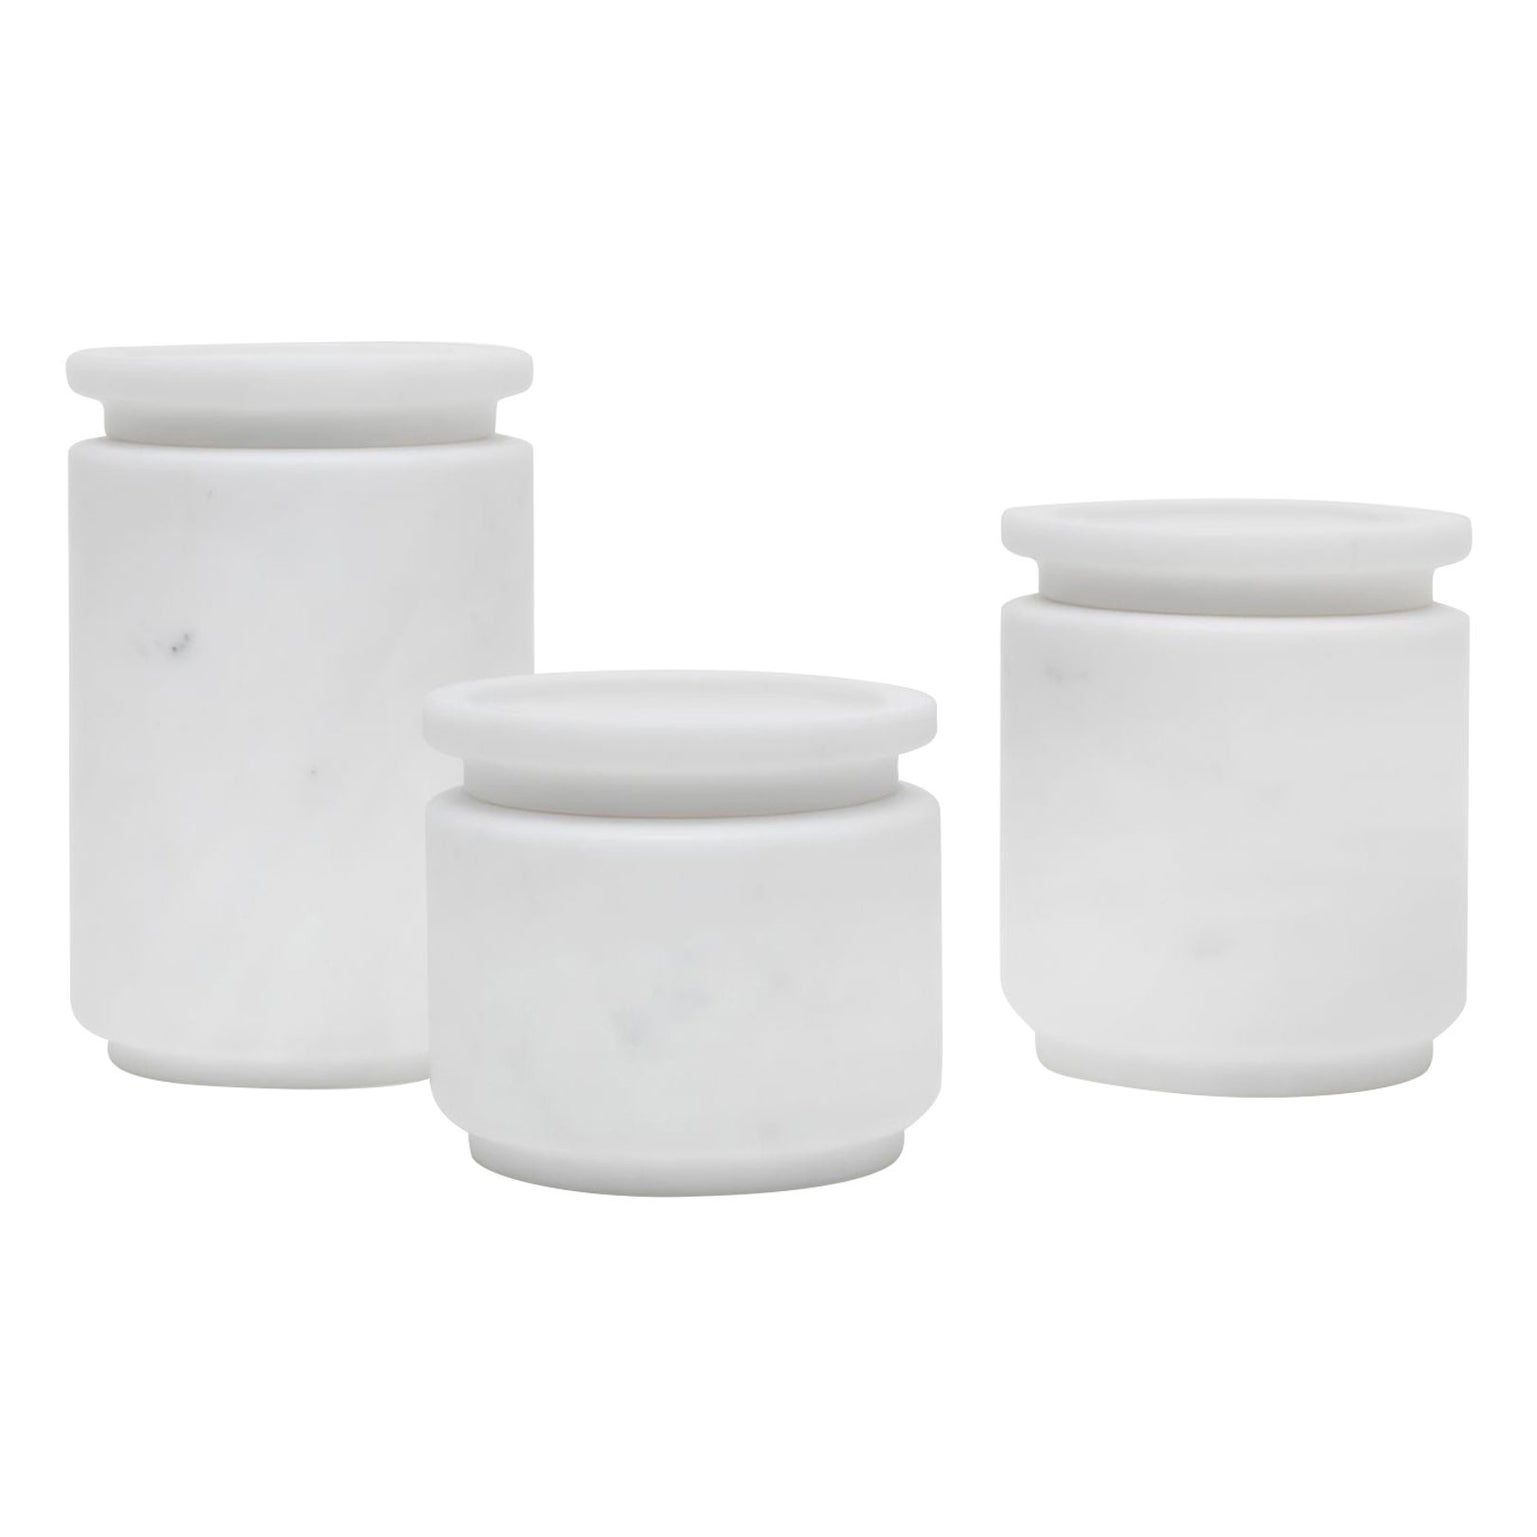 Set of 3 Pyxis Pots, White by Ivan Colominas For Sale